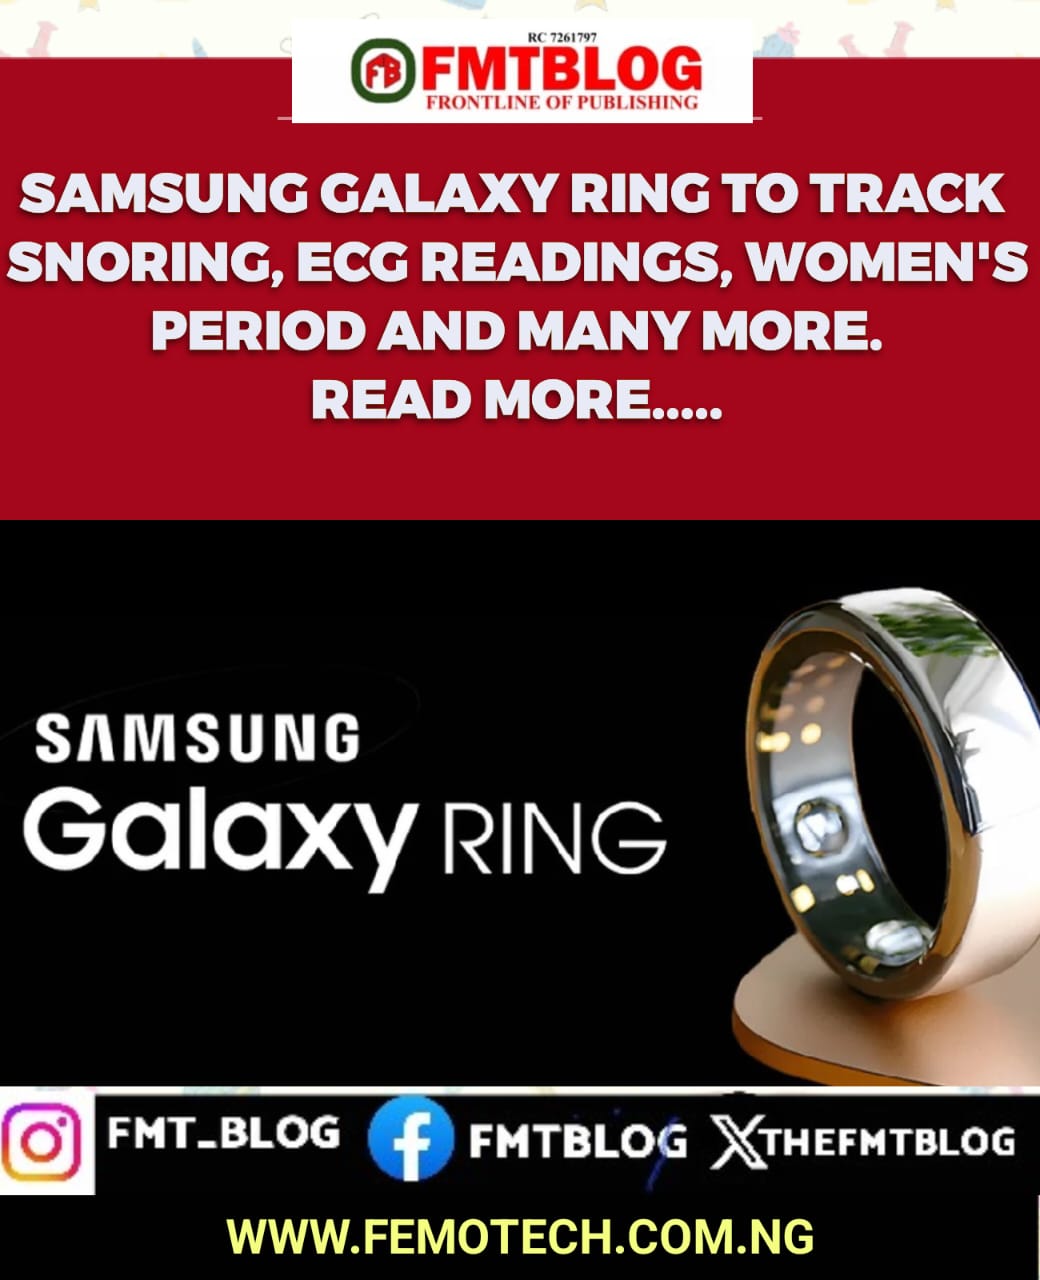 Samsung Galaxy Ring To Track Snoring, ECG Readings, Women’s Period, Many More